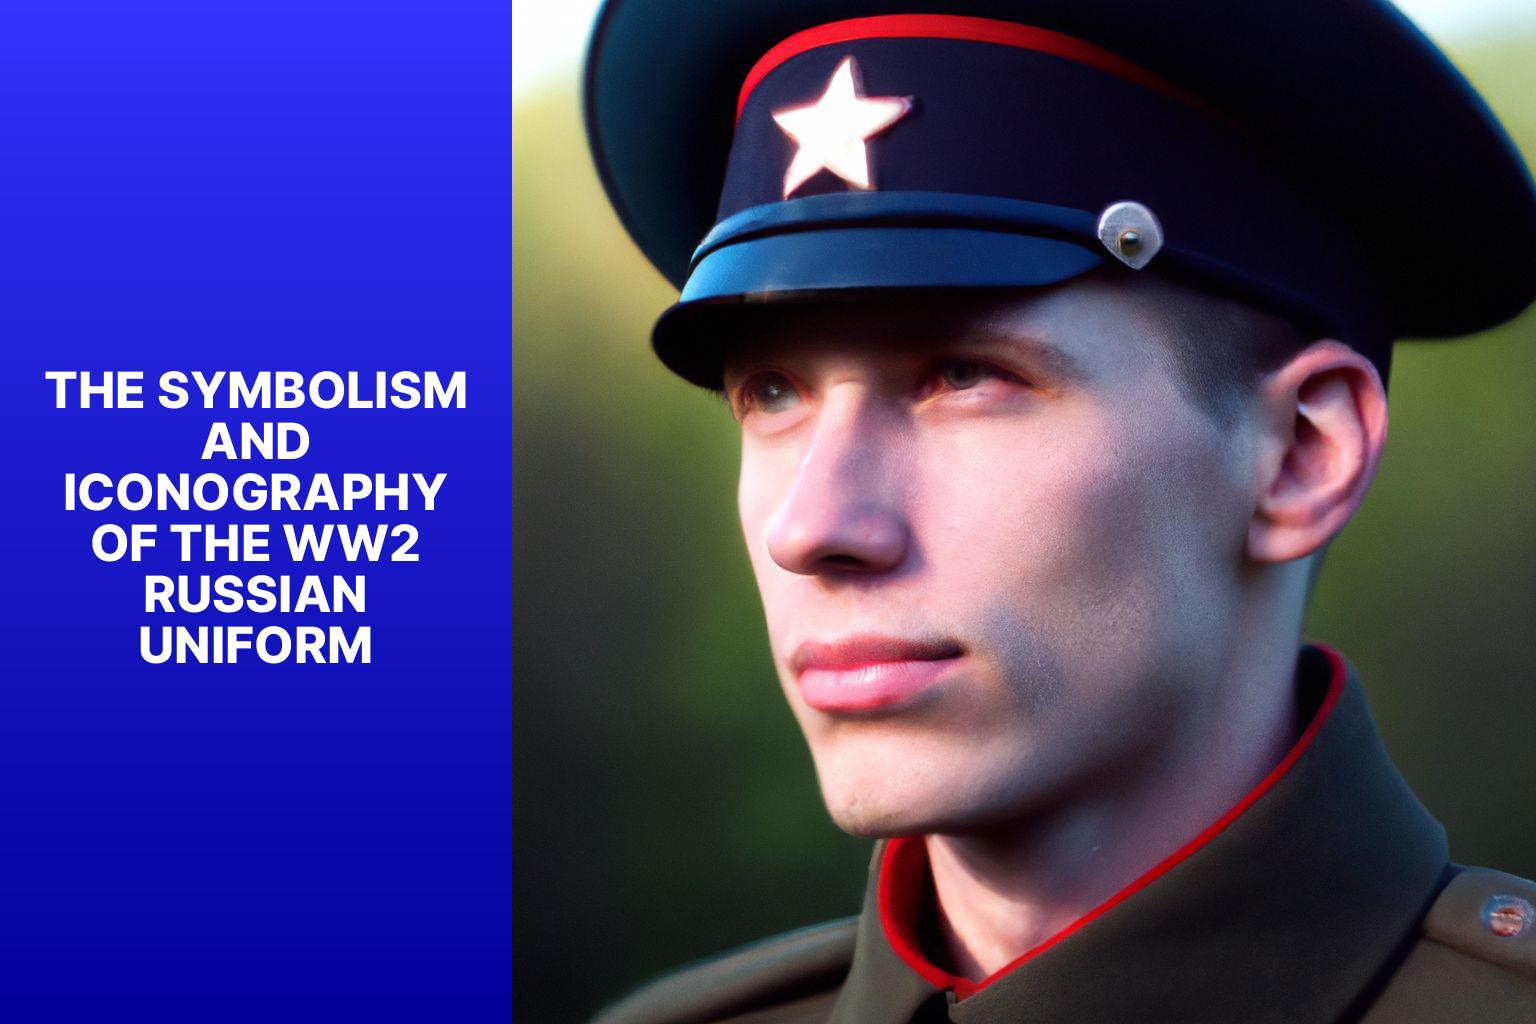 The Symbolism and Iconography of the WW2 Russian Uniform - Exploring the Significance of the WW2 Russian Uniform in Soviet History 